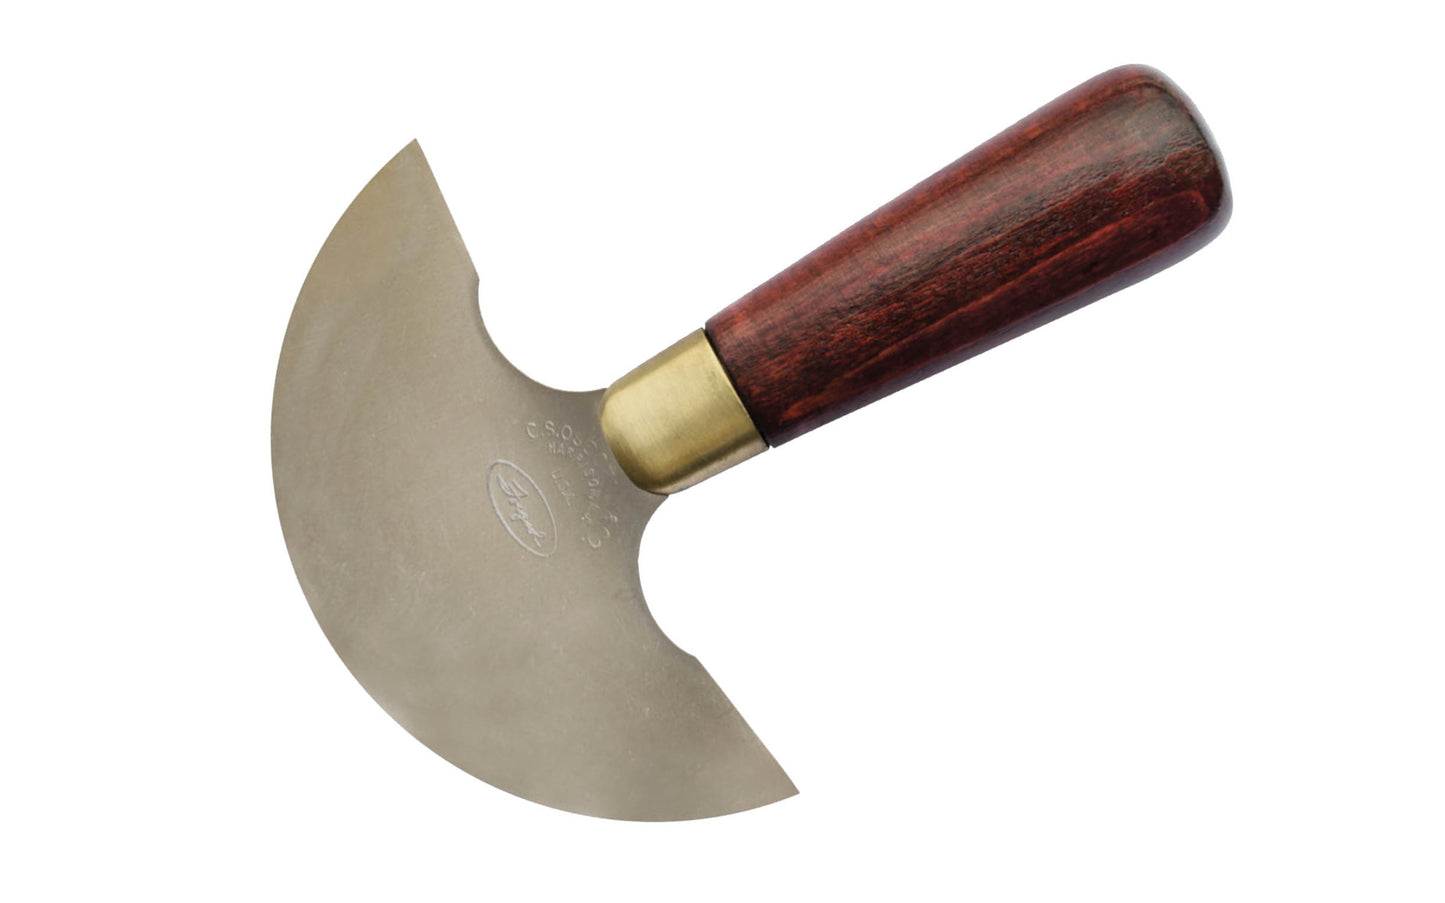 C.S. Osborne Round Knife No. 70 ~ Made in the USA ~ Excellent for leatherwork. High quality carbon steel blade Rosewood handle with brass ferrule ~  Made in USA ~ 096685100227